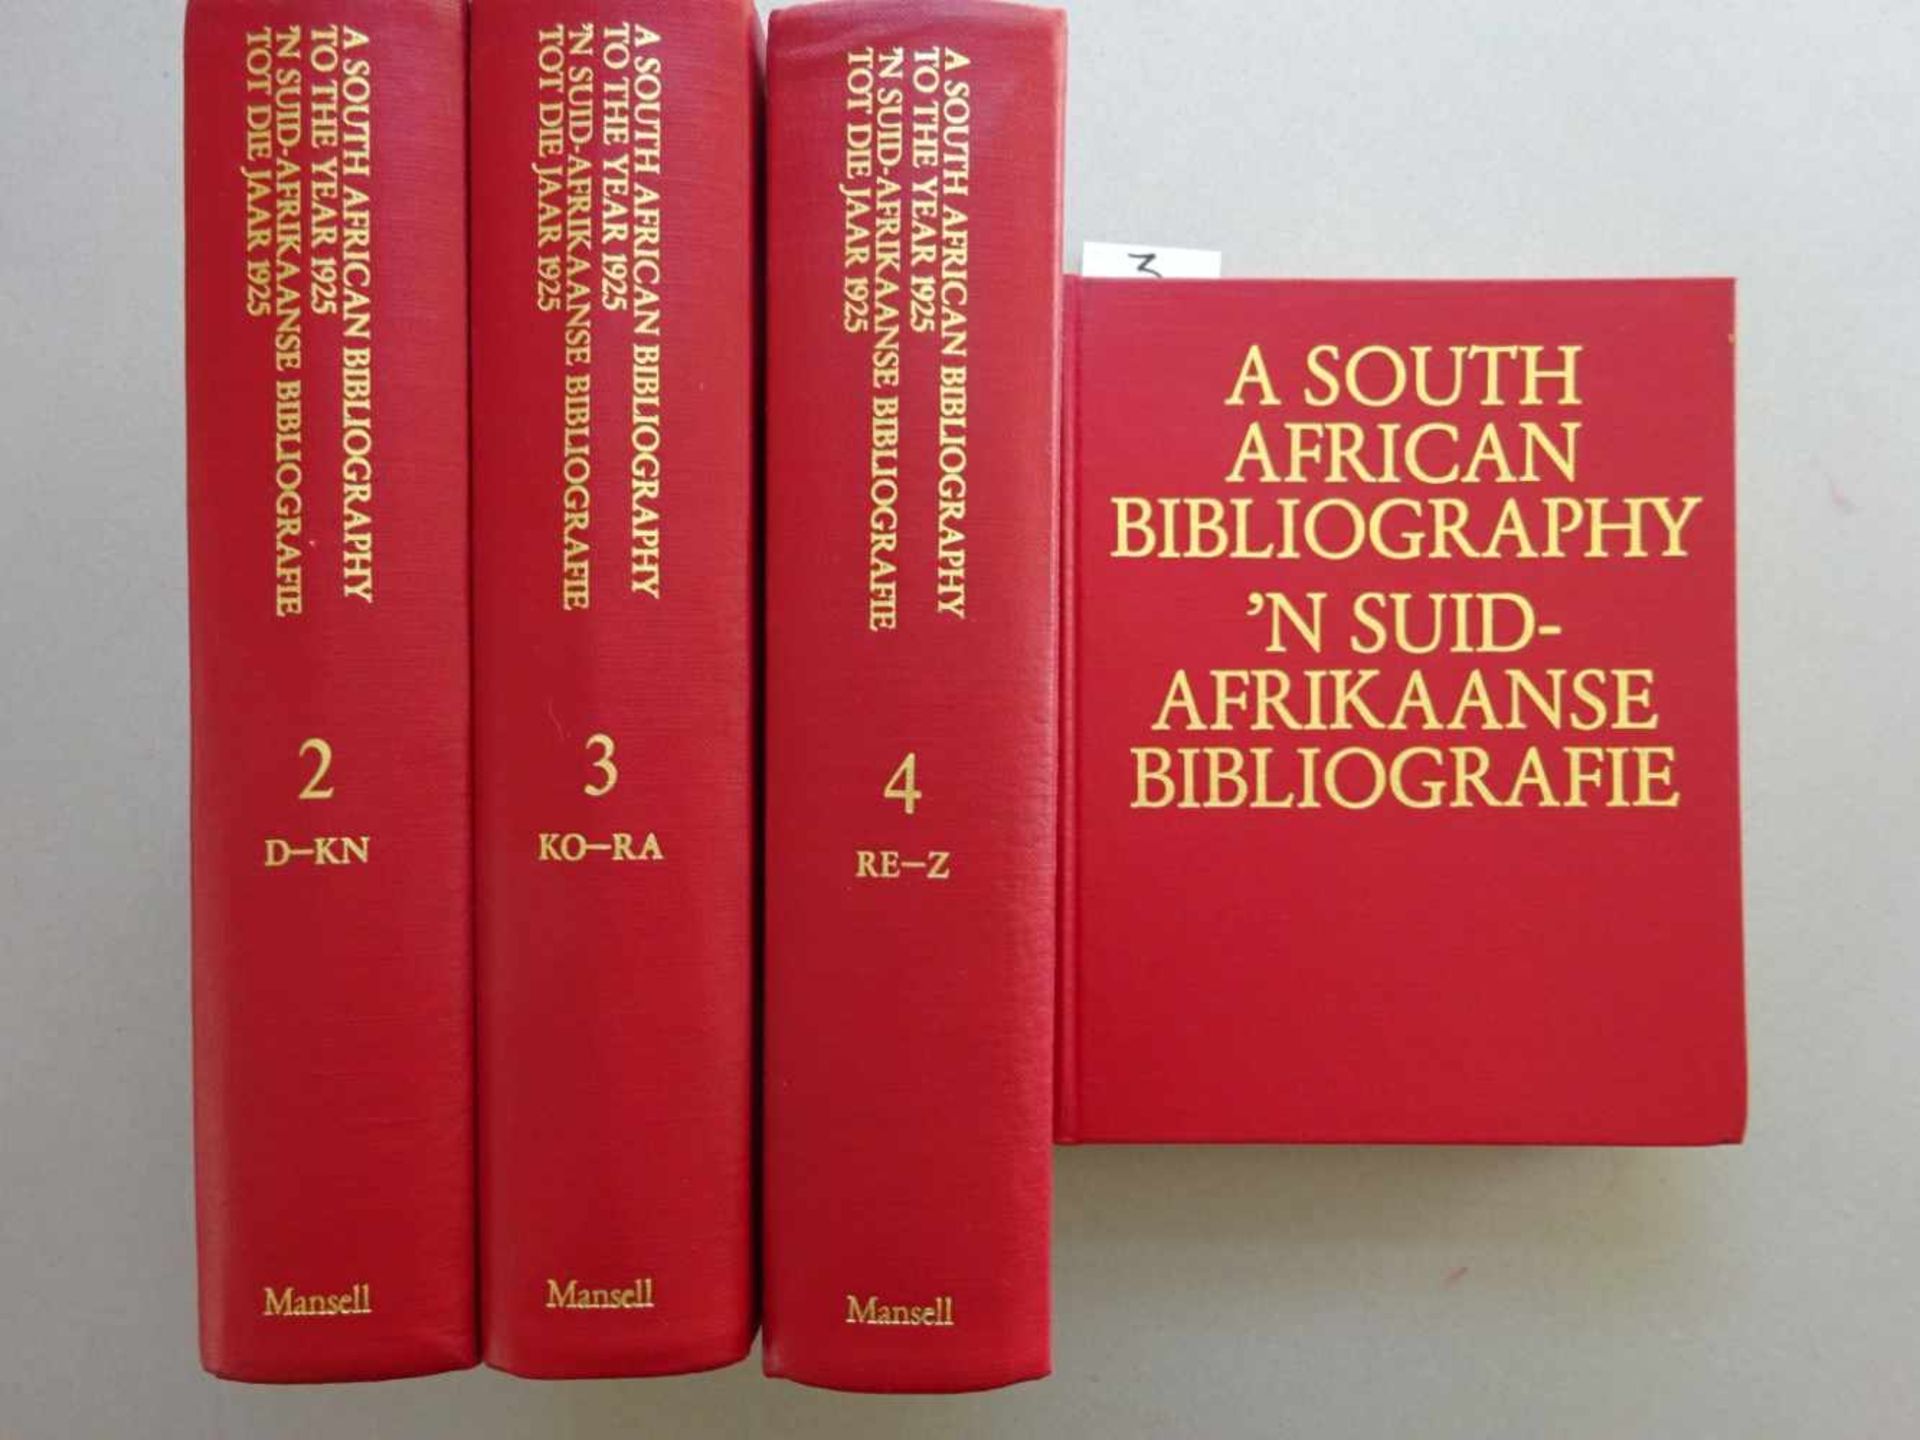 Bibliographie.-A South African Bibliography to the year 1925. Being a revision and continuation of